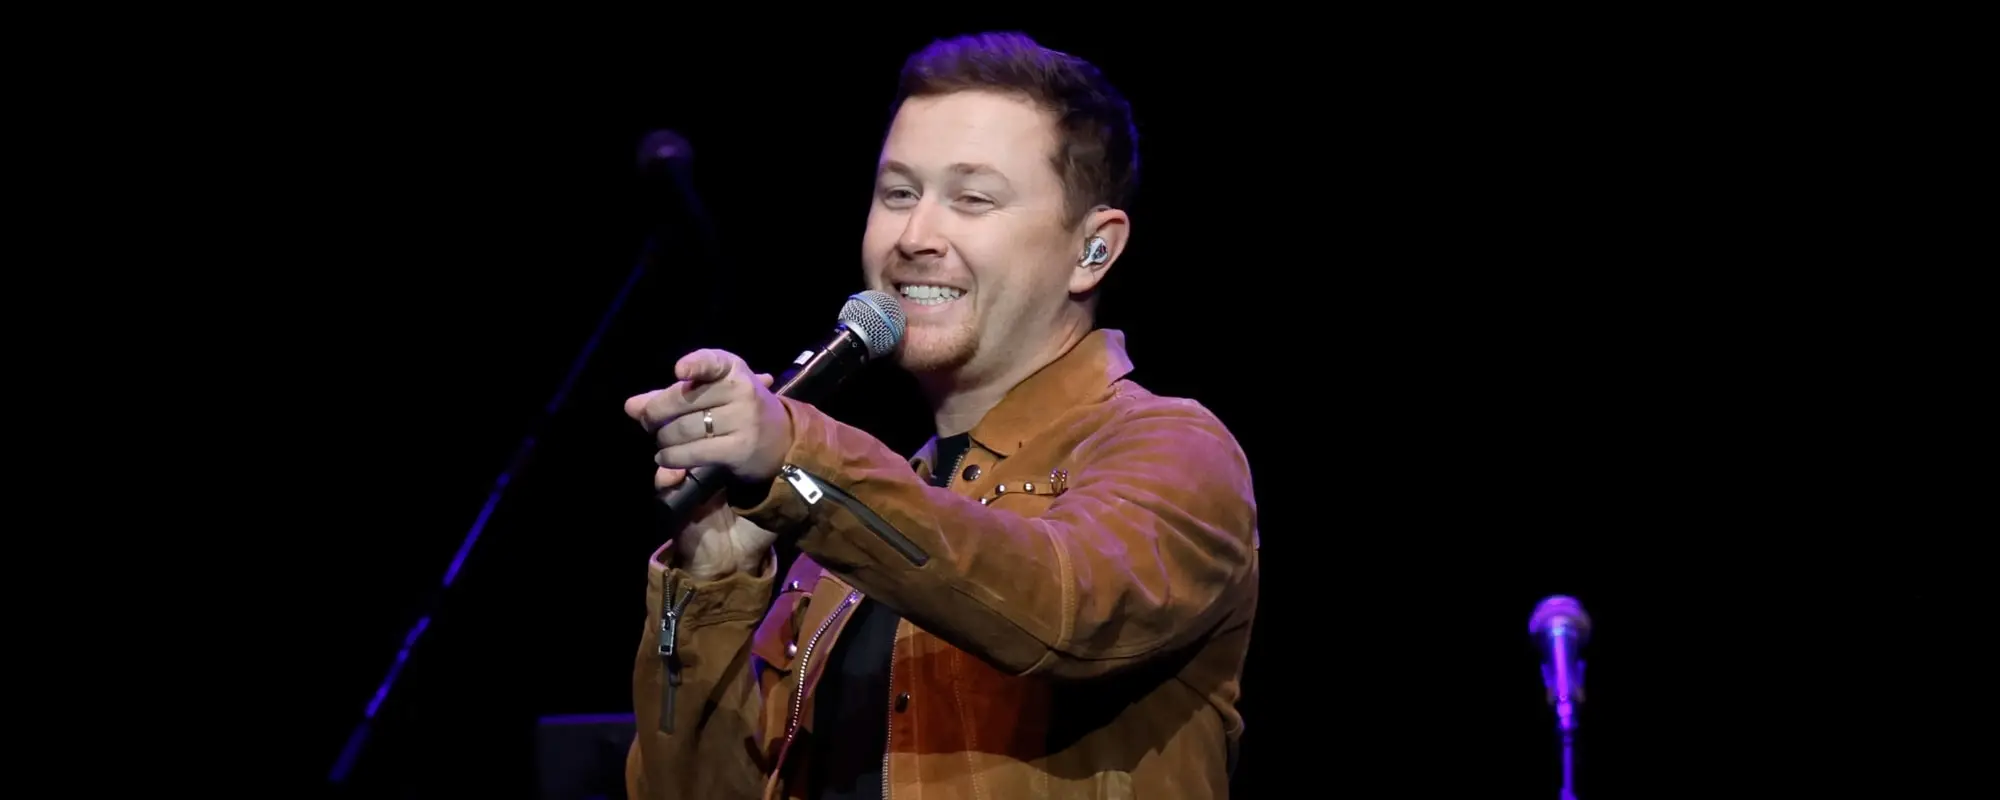 Watch Scotty McCreery Achieve His Lifelong Dream as Randy Travis and Josh Turner Welcome Him to the Grand Ole Opry Family